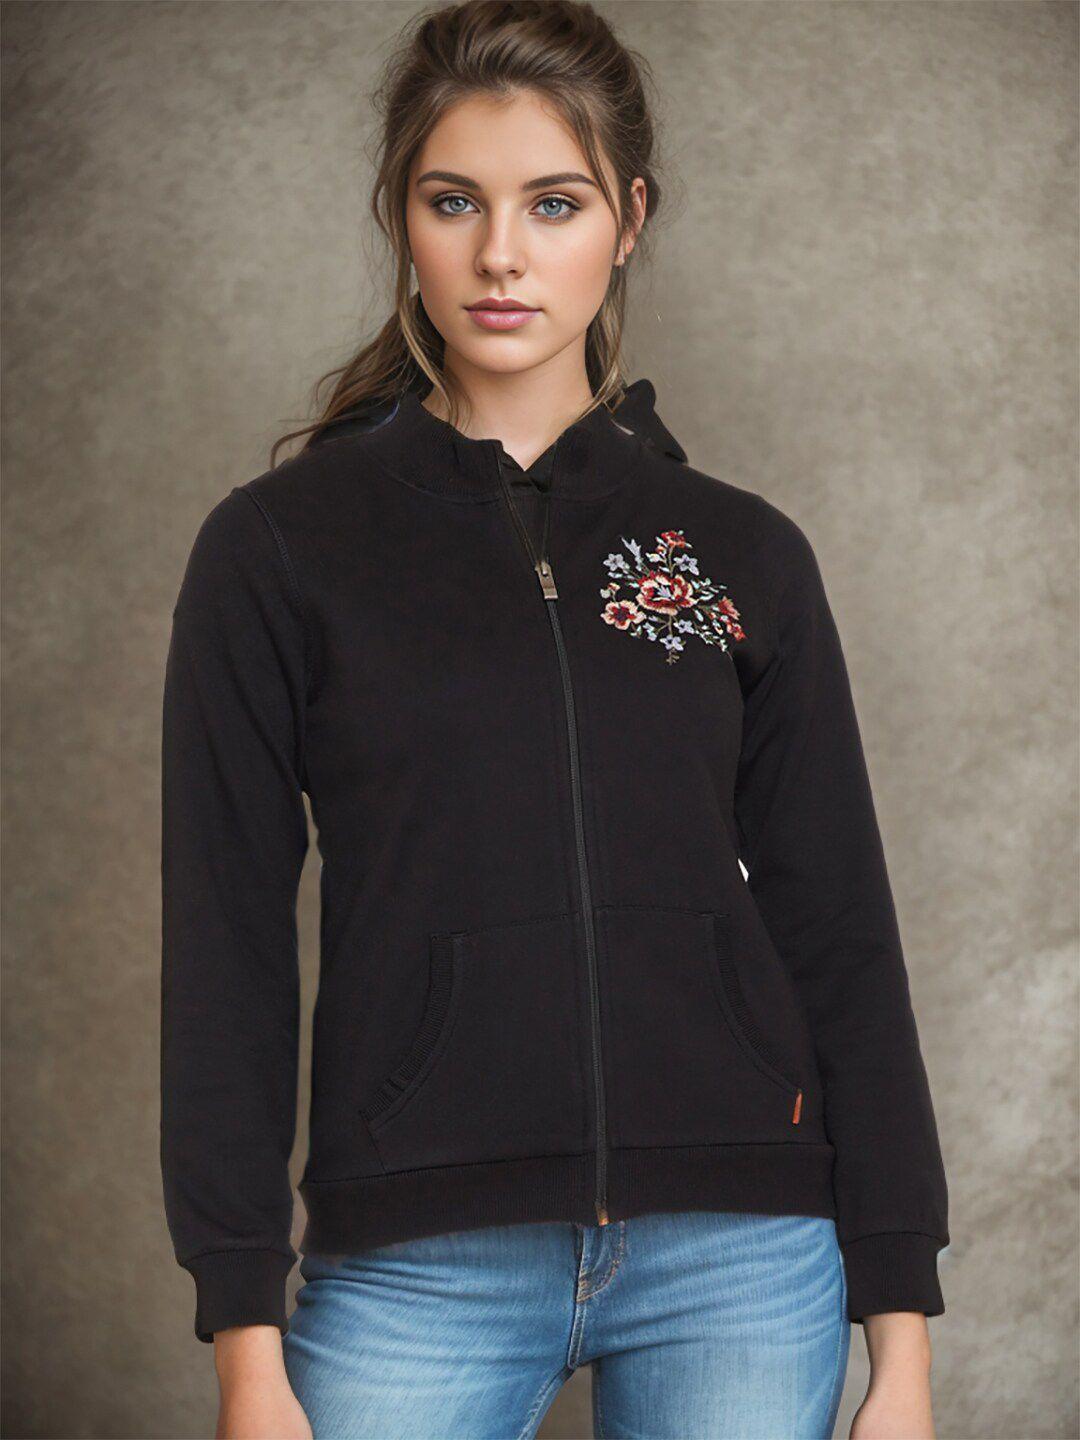 rare floral embroidered front-open fleece sweatshirt